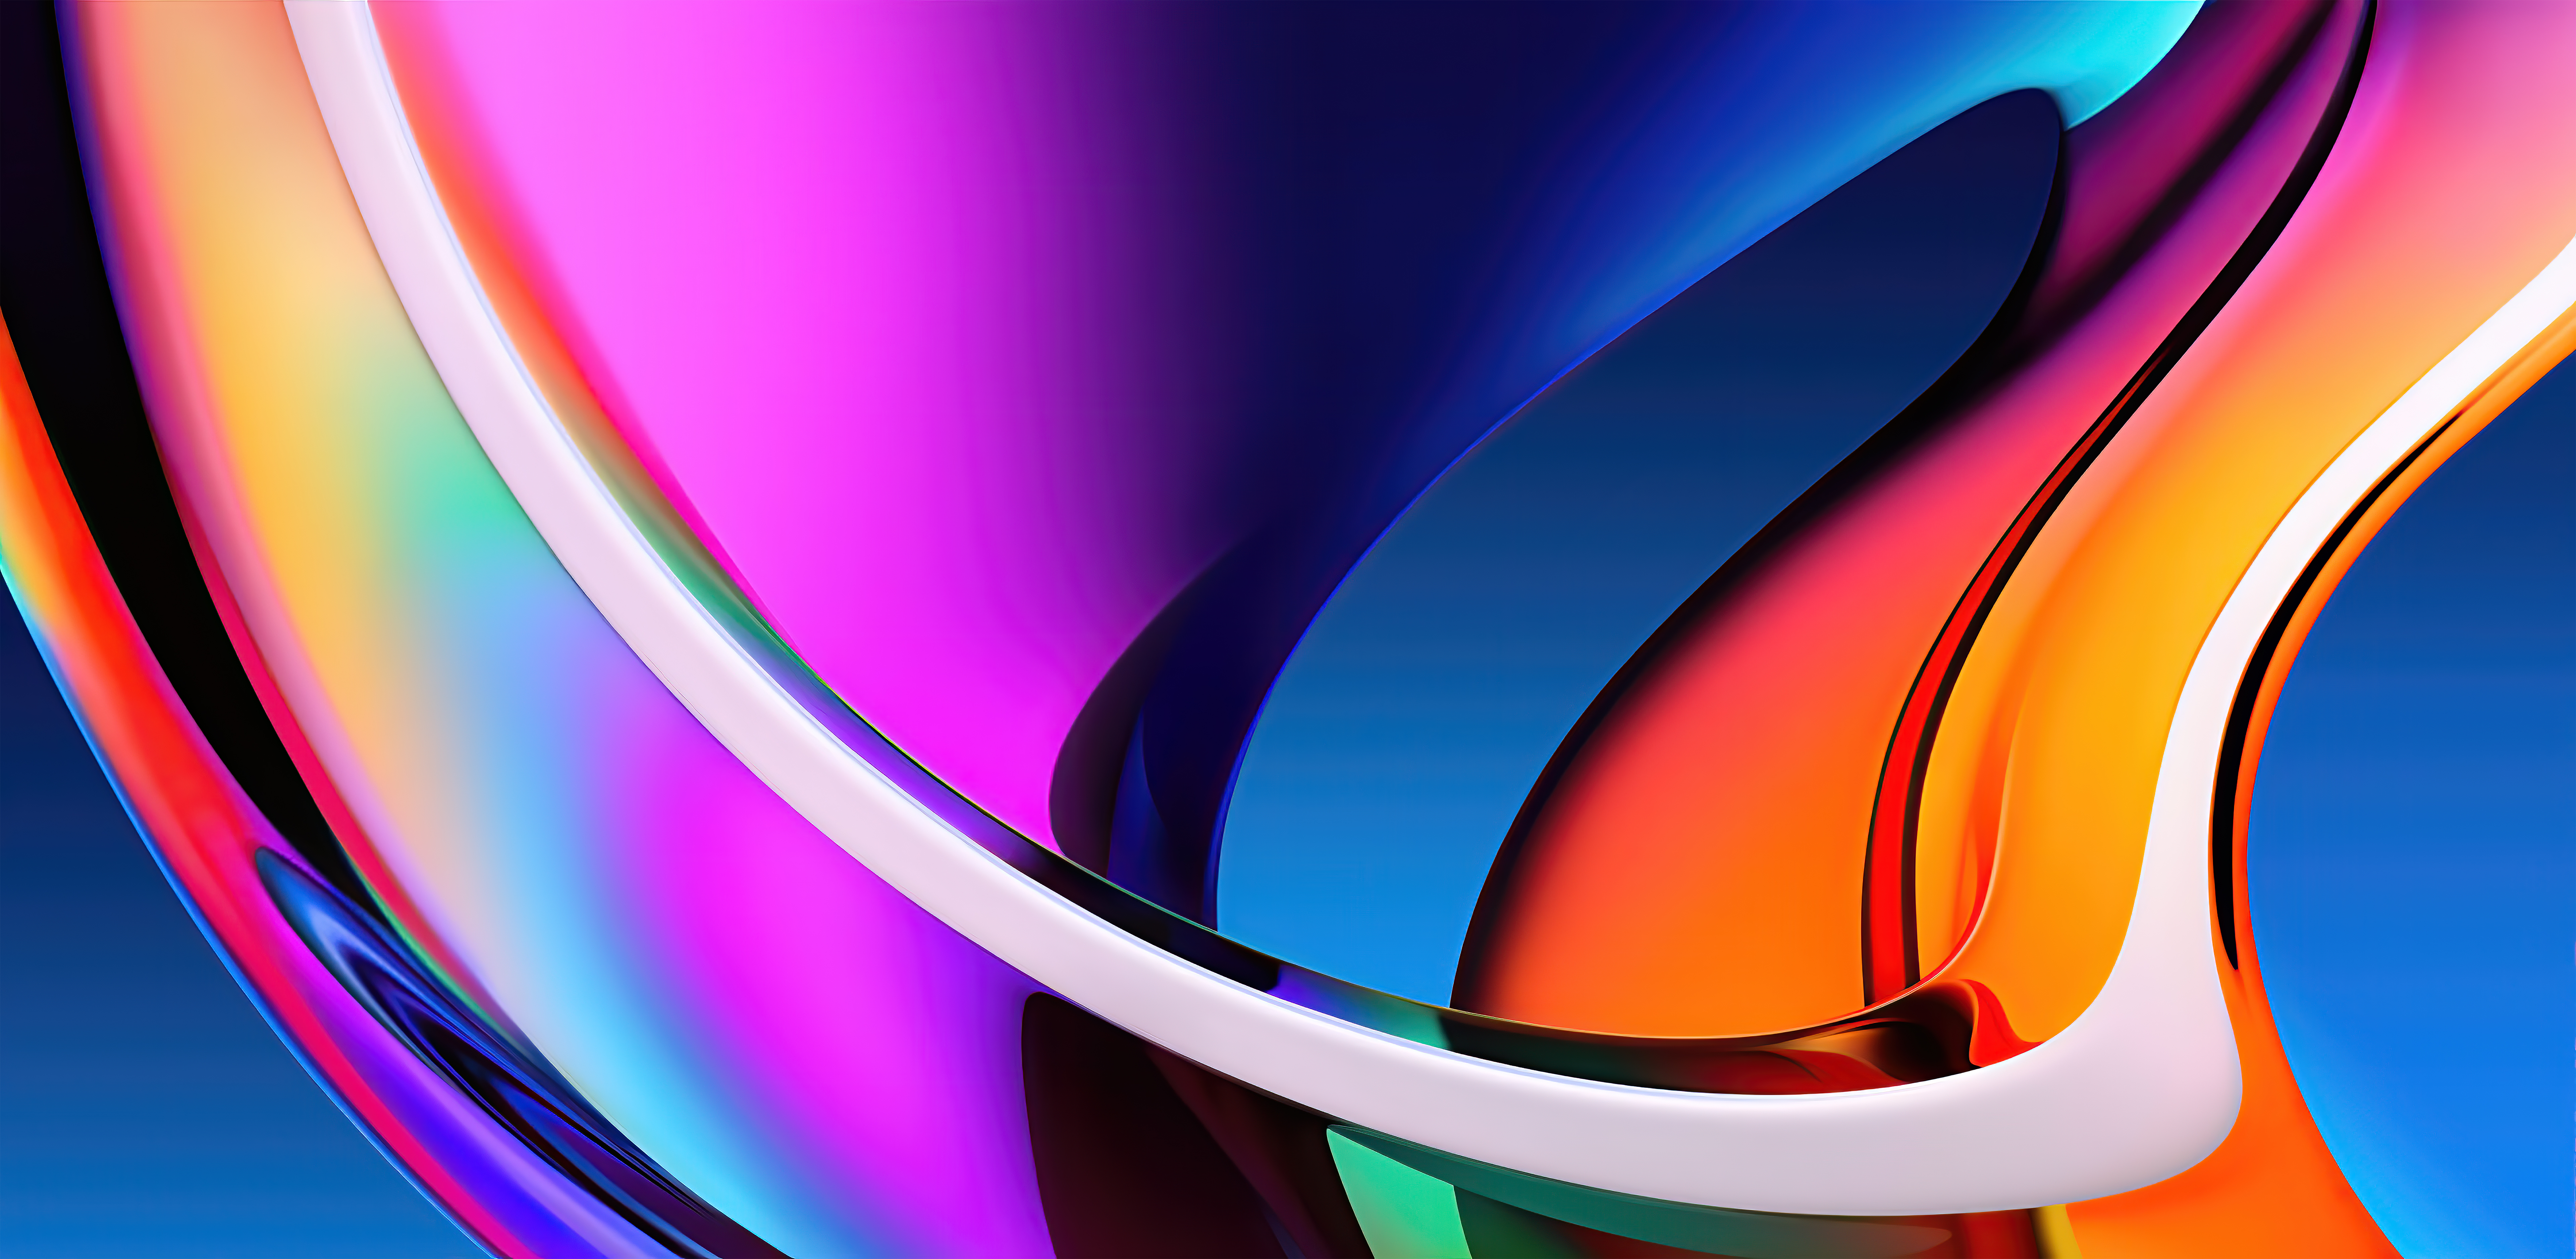 Apple iMac Wallpaper 4K, Colorful, Stock, Abstract, #2278